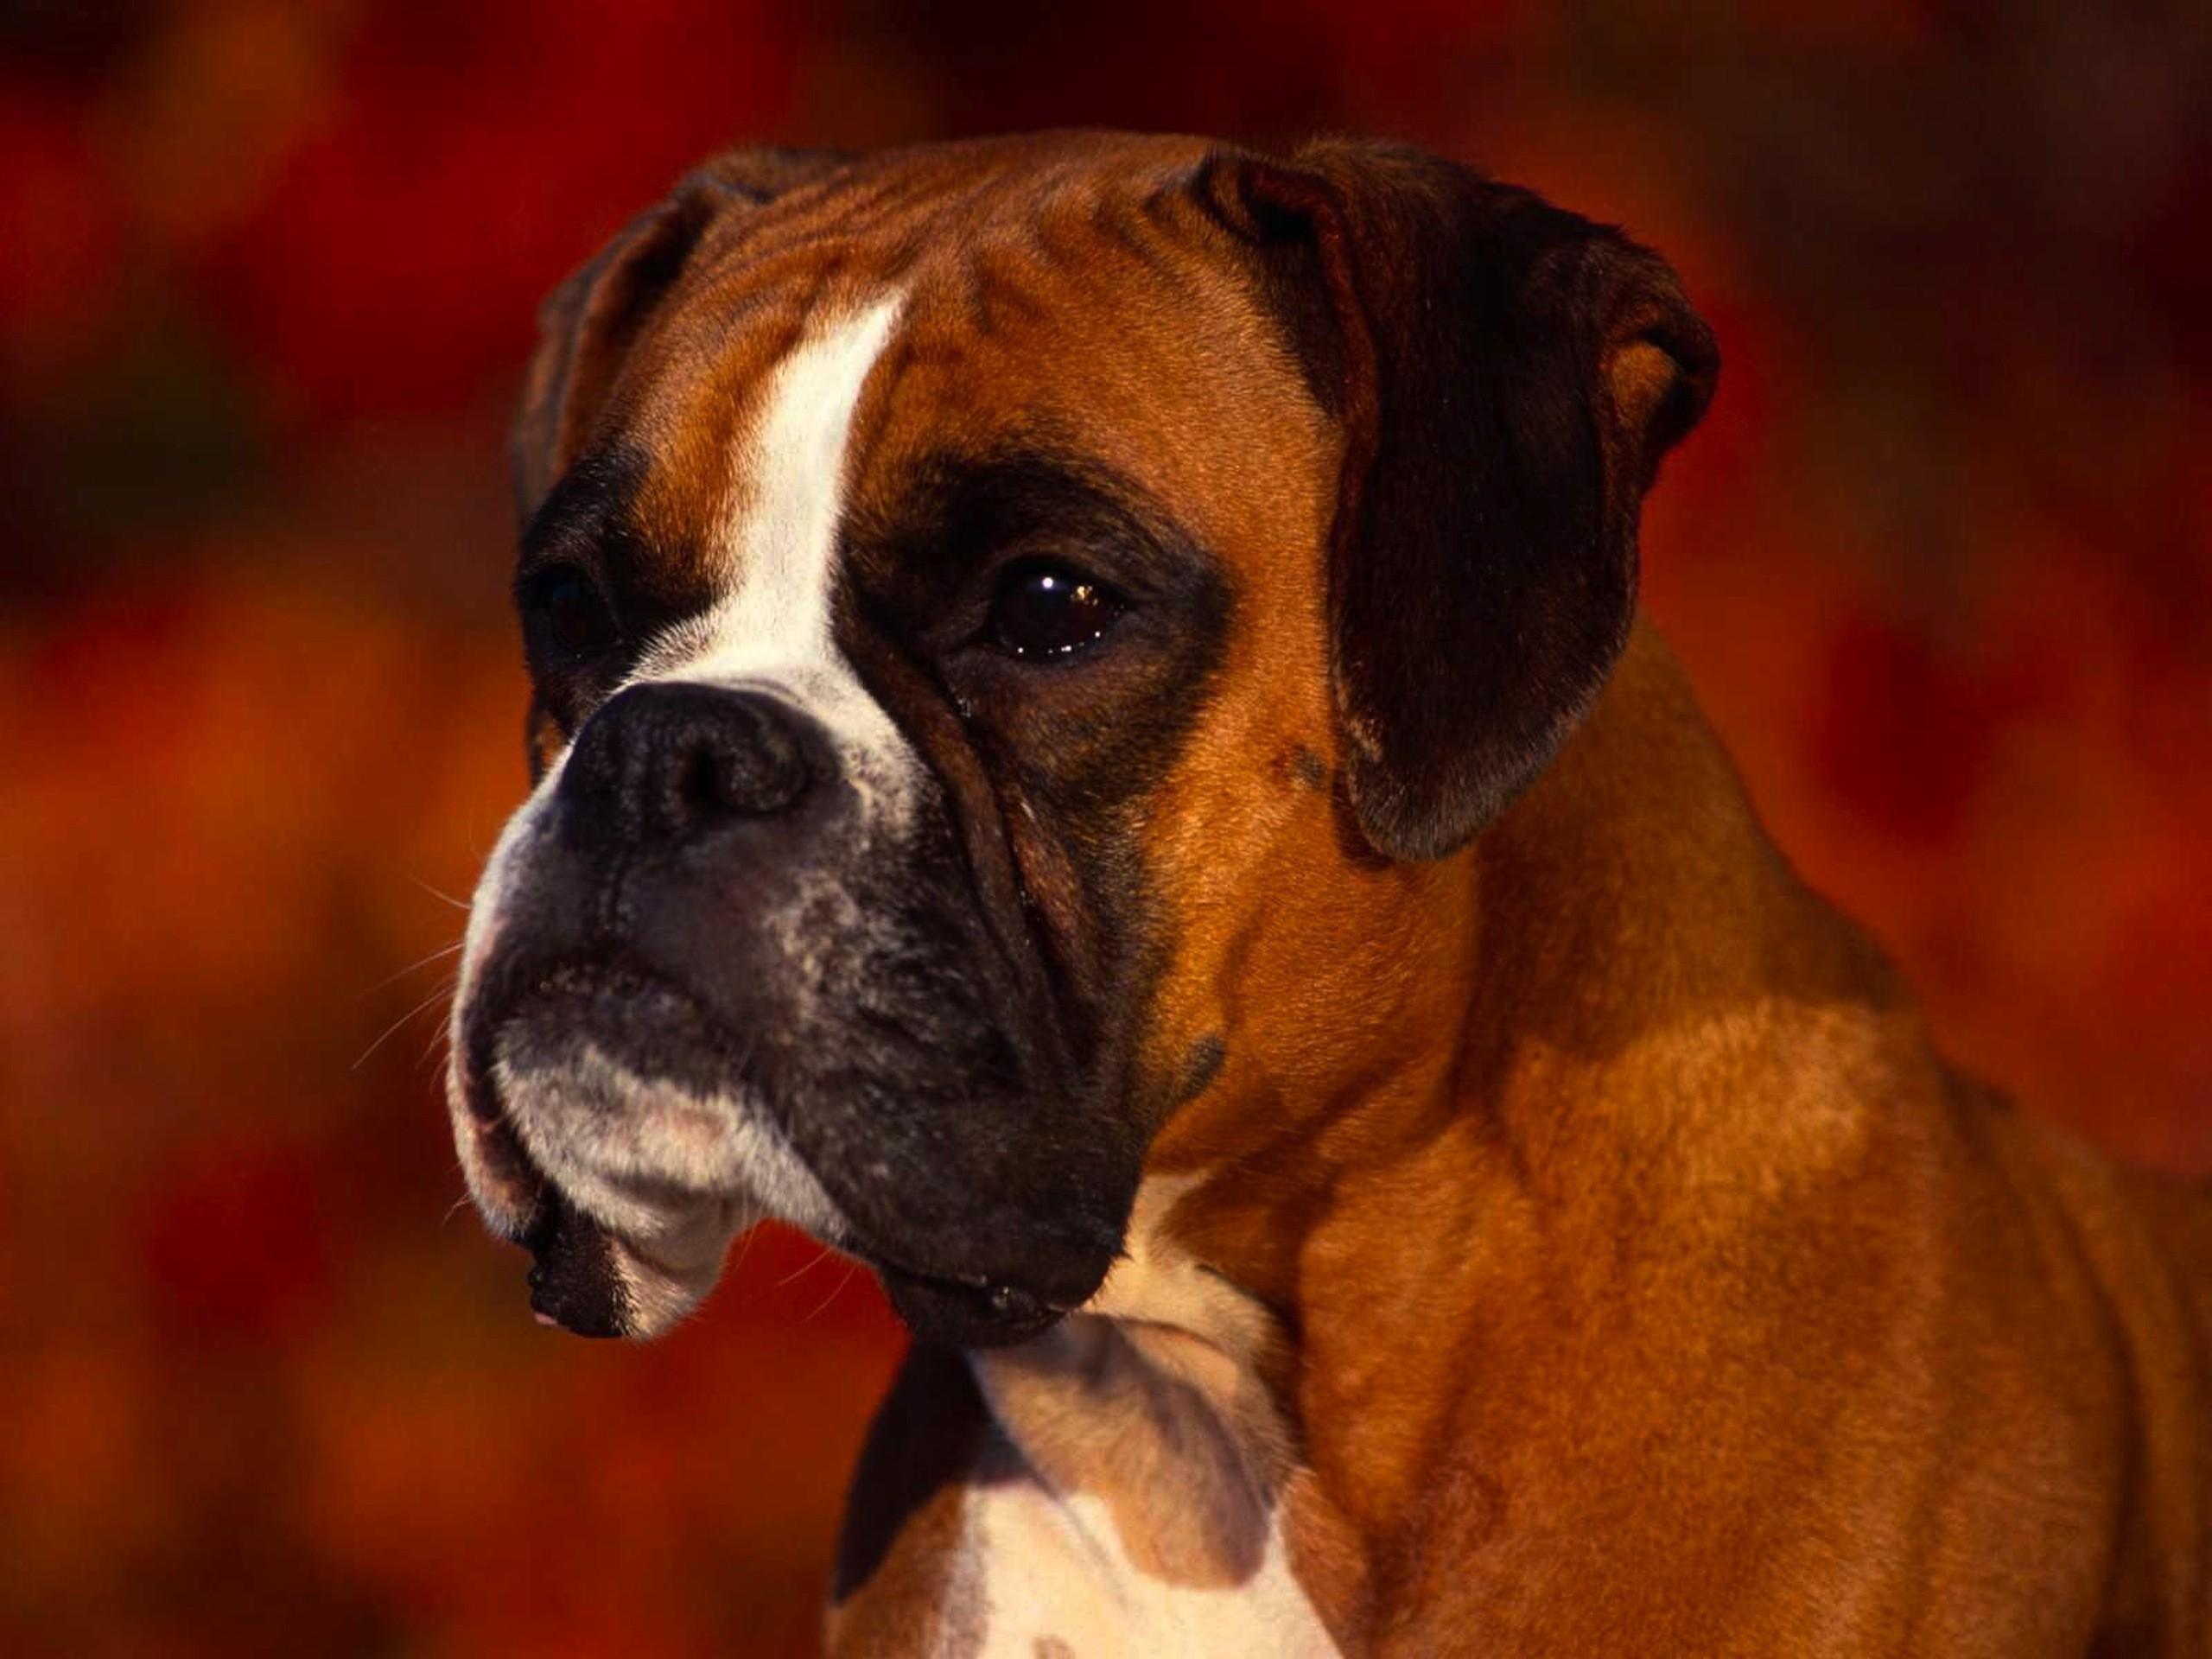 Animals boxer dog dogs wallpaper. PC